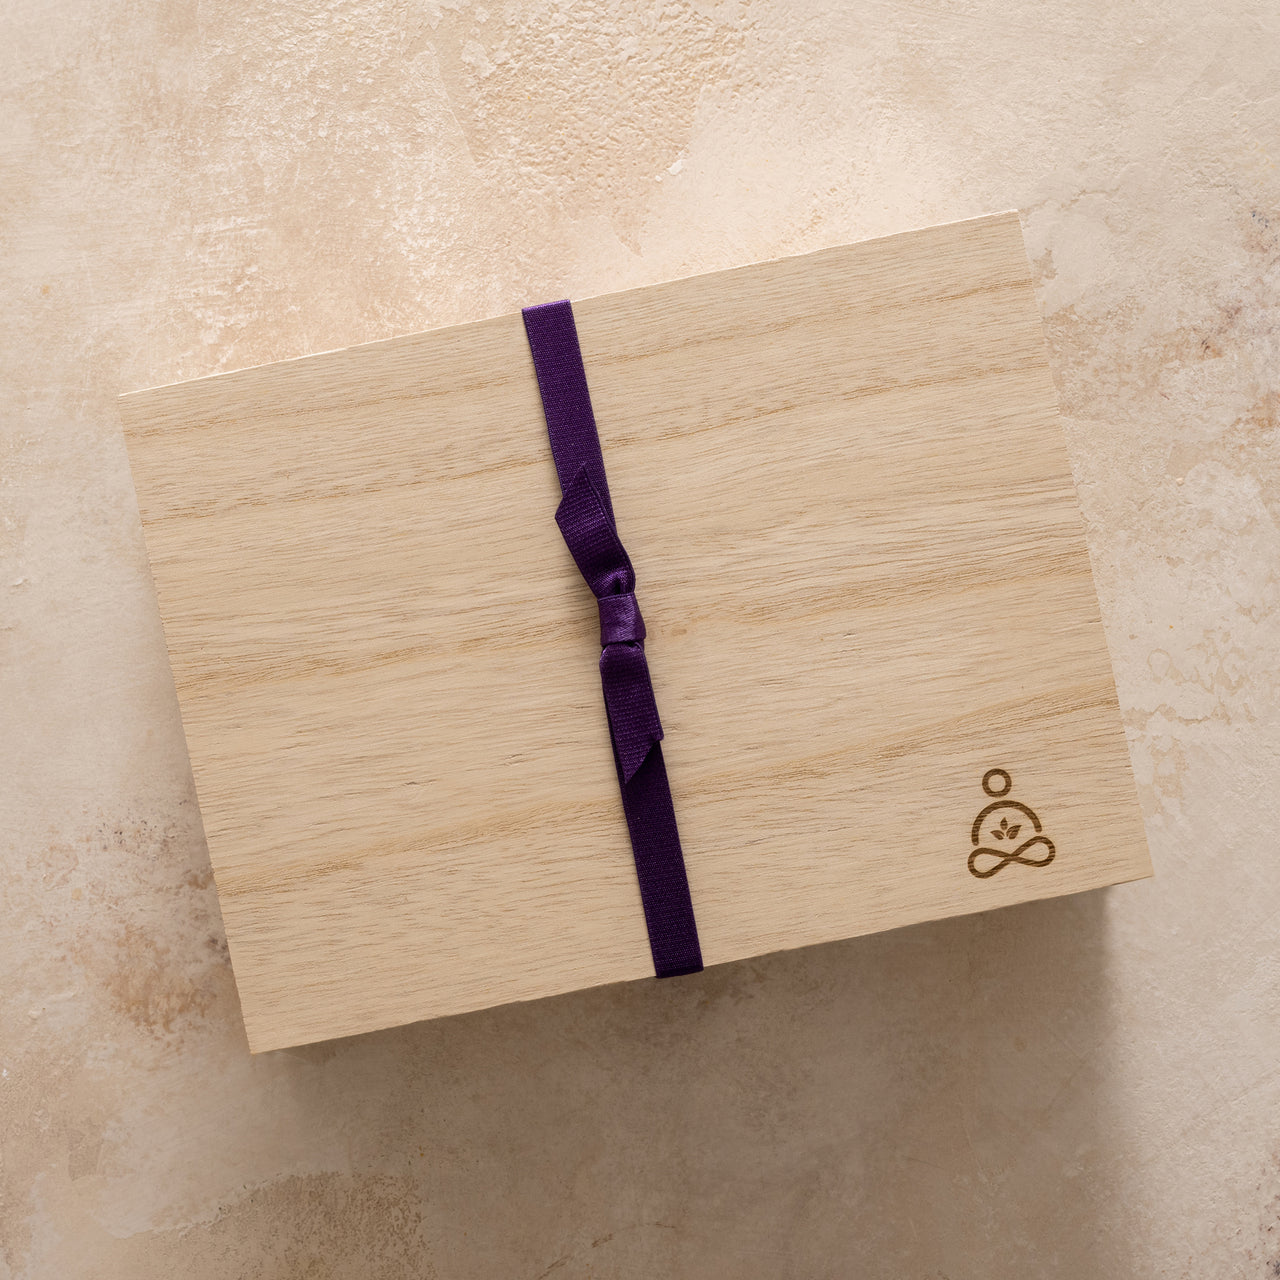 Green Goo's Sierra Sage Sleep Secrets Gift Set comes packaged in an embossed wooden collector's box, wrapped in purple ribbon.